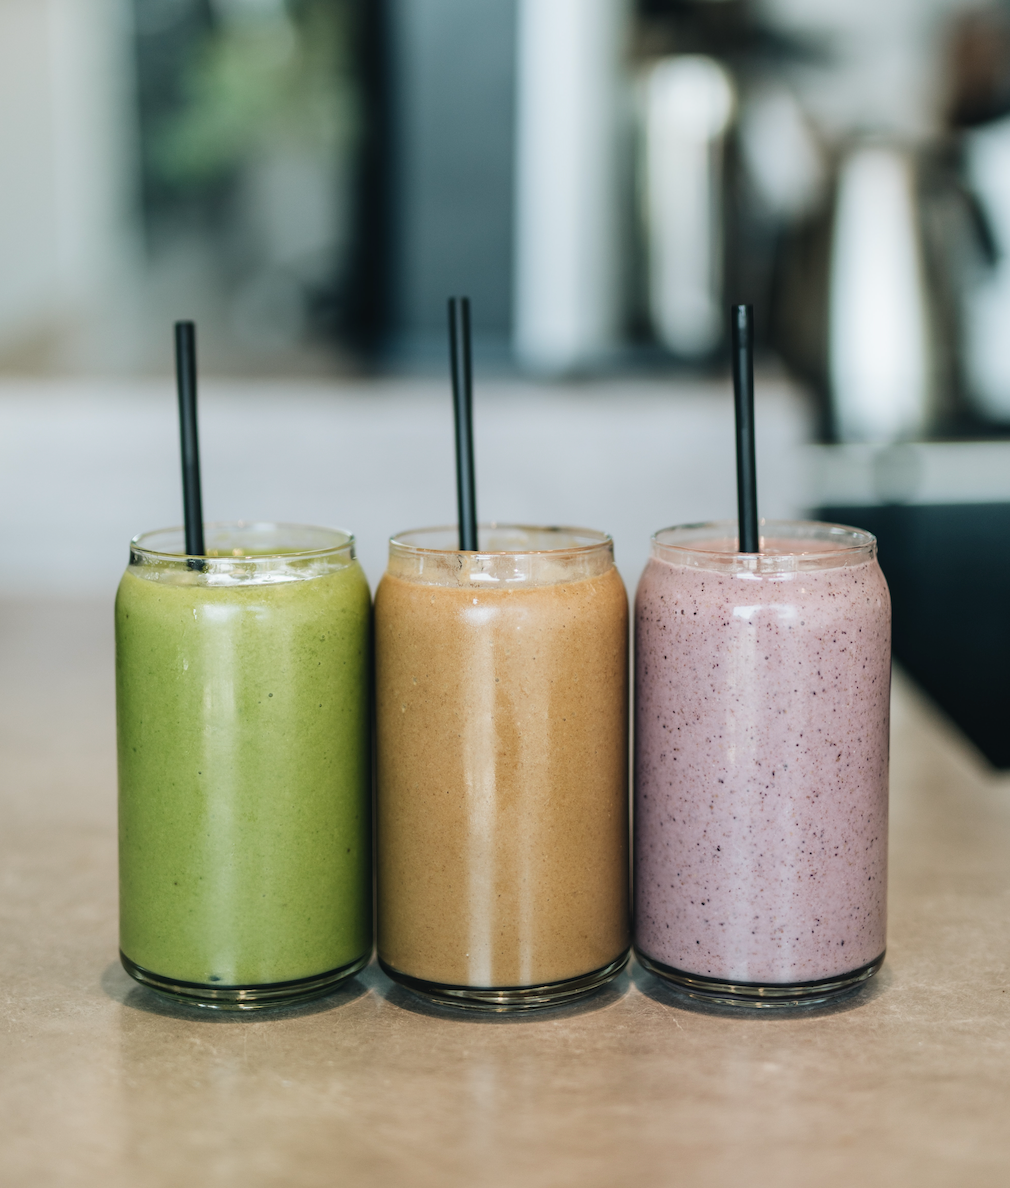 RISE Brewing Co. Oat Milk Smoothies